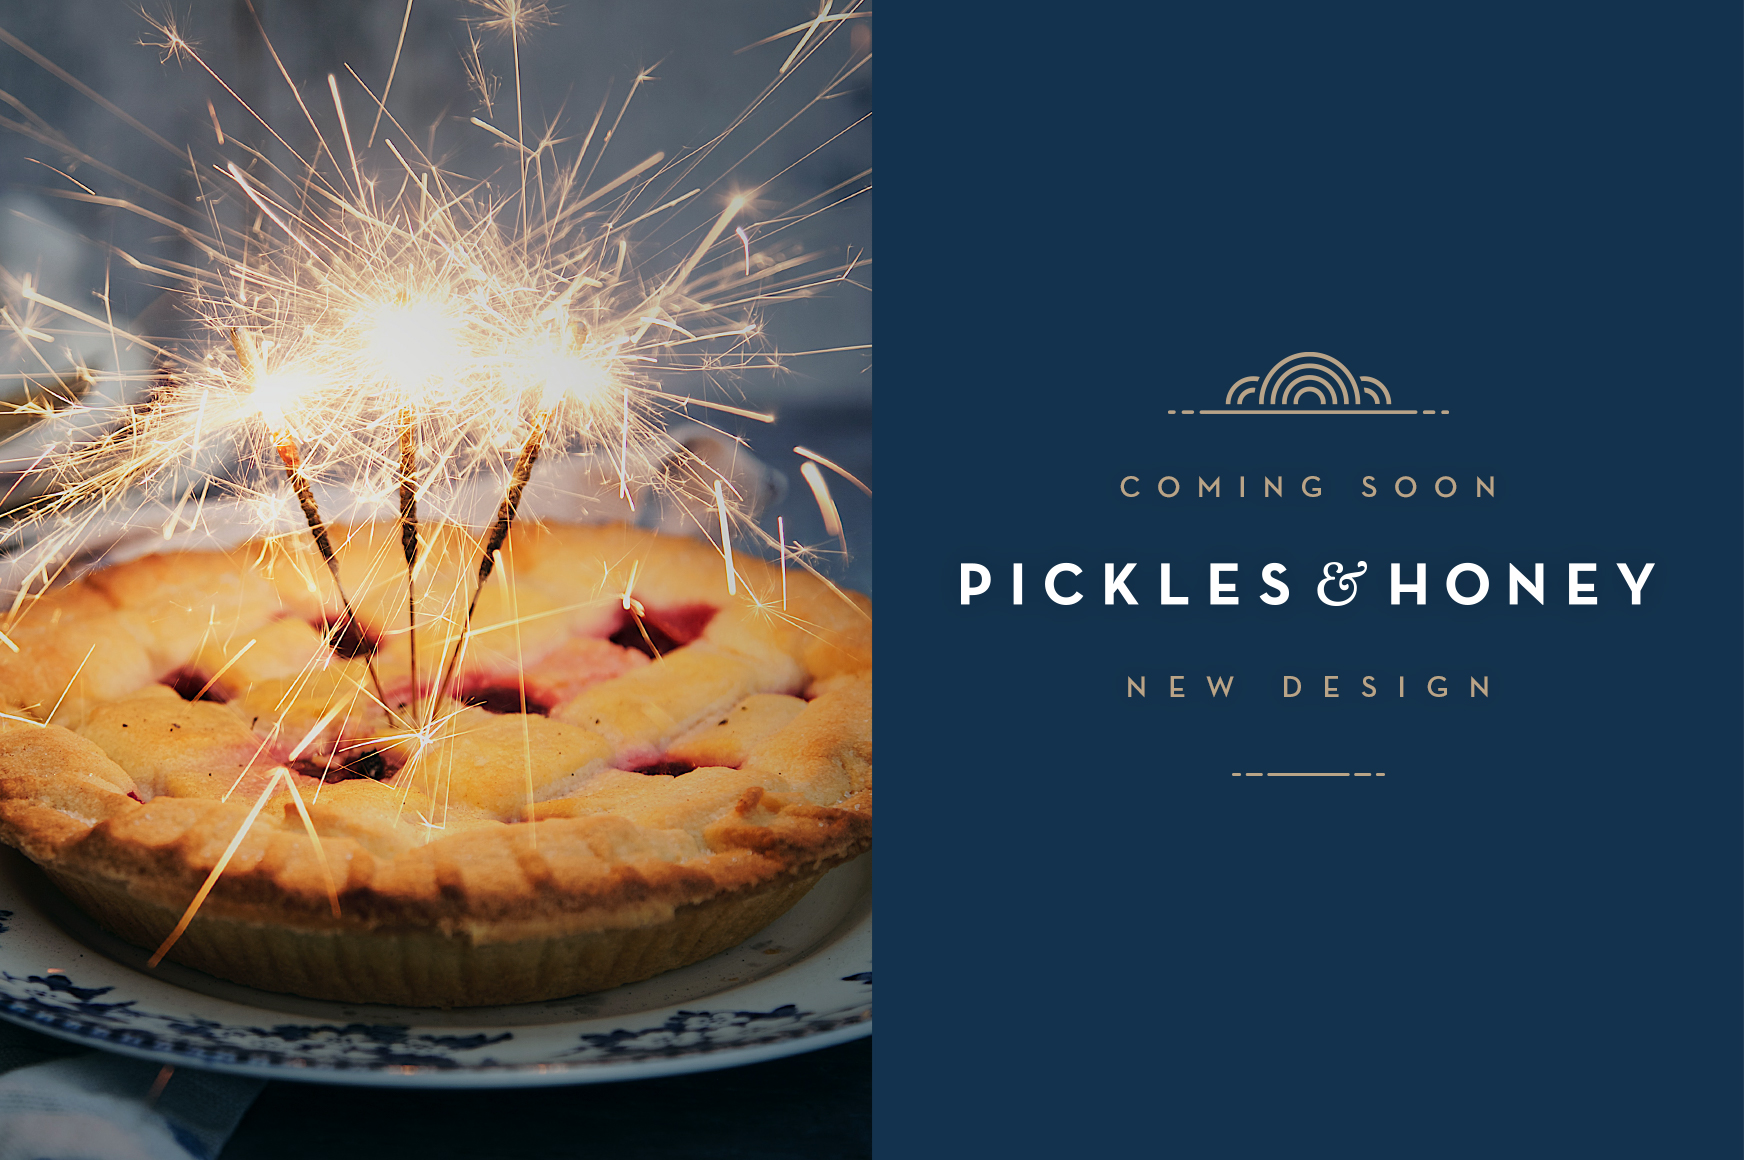 Coming in June: a NEW Pickles & Honey Design!